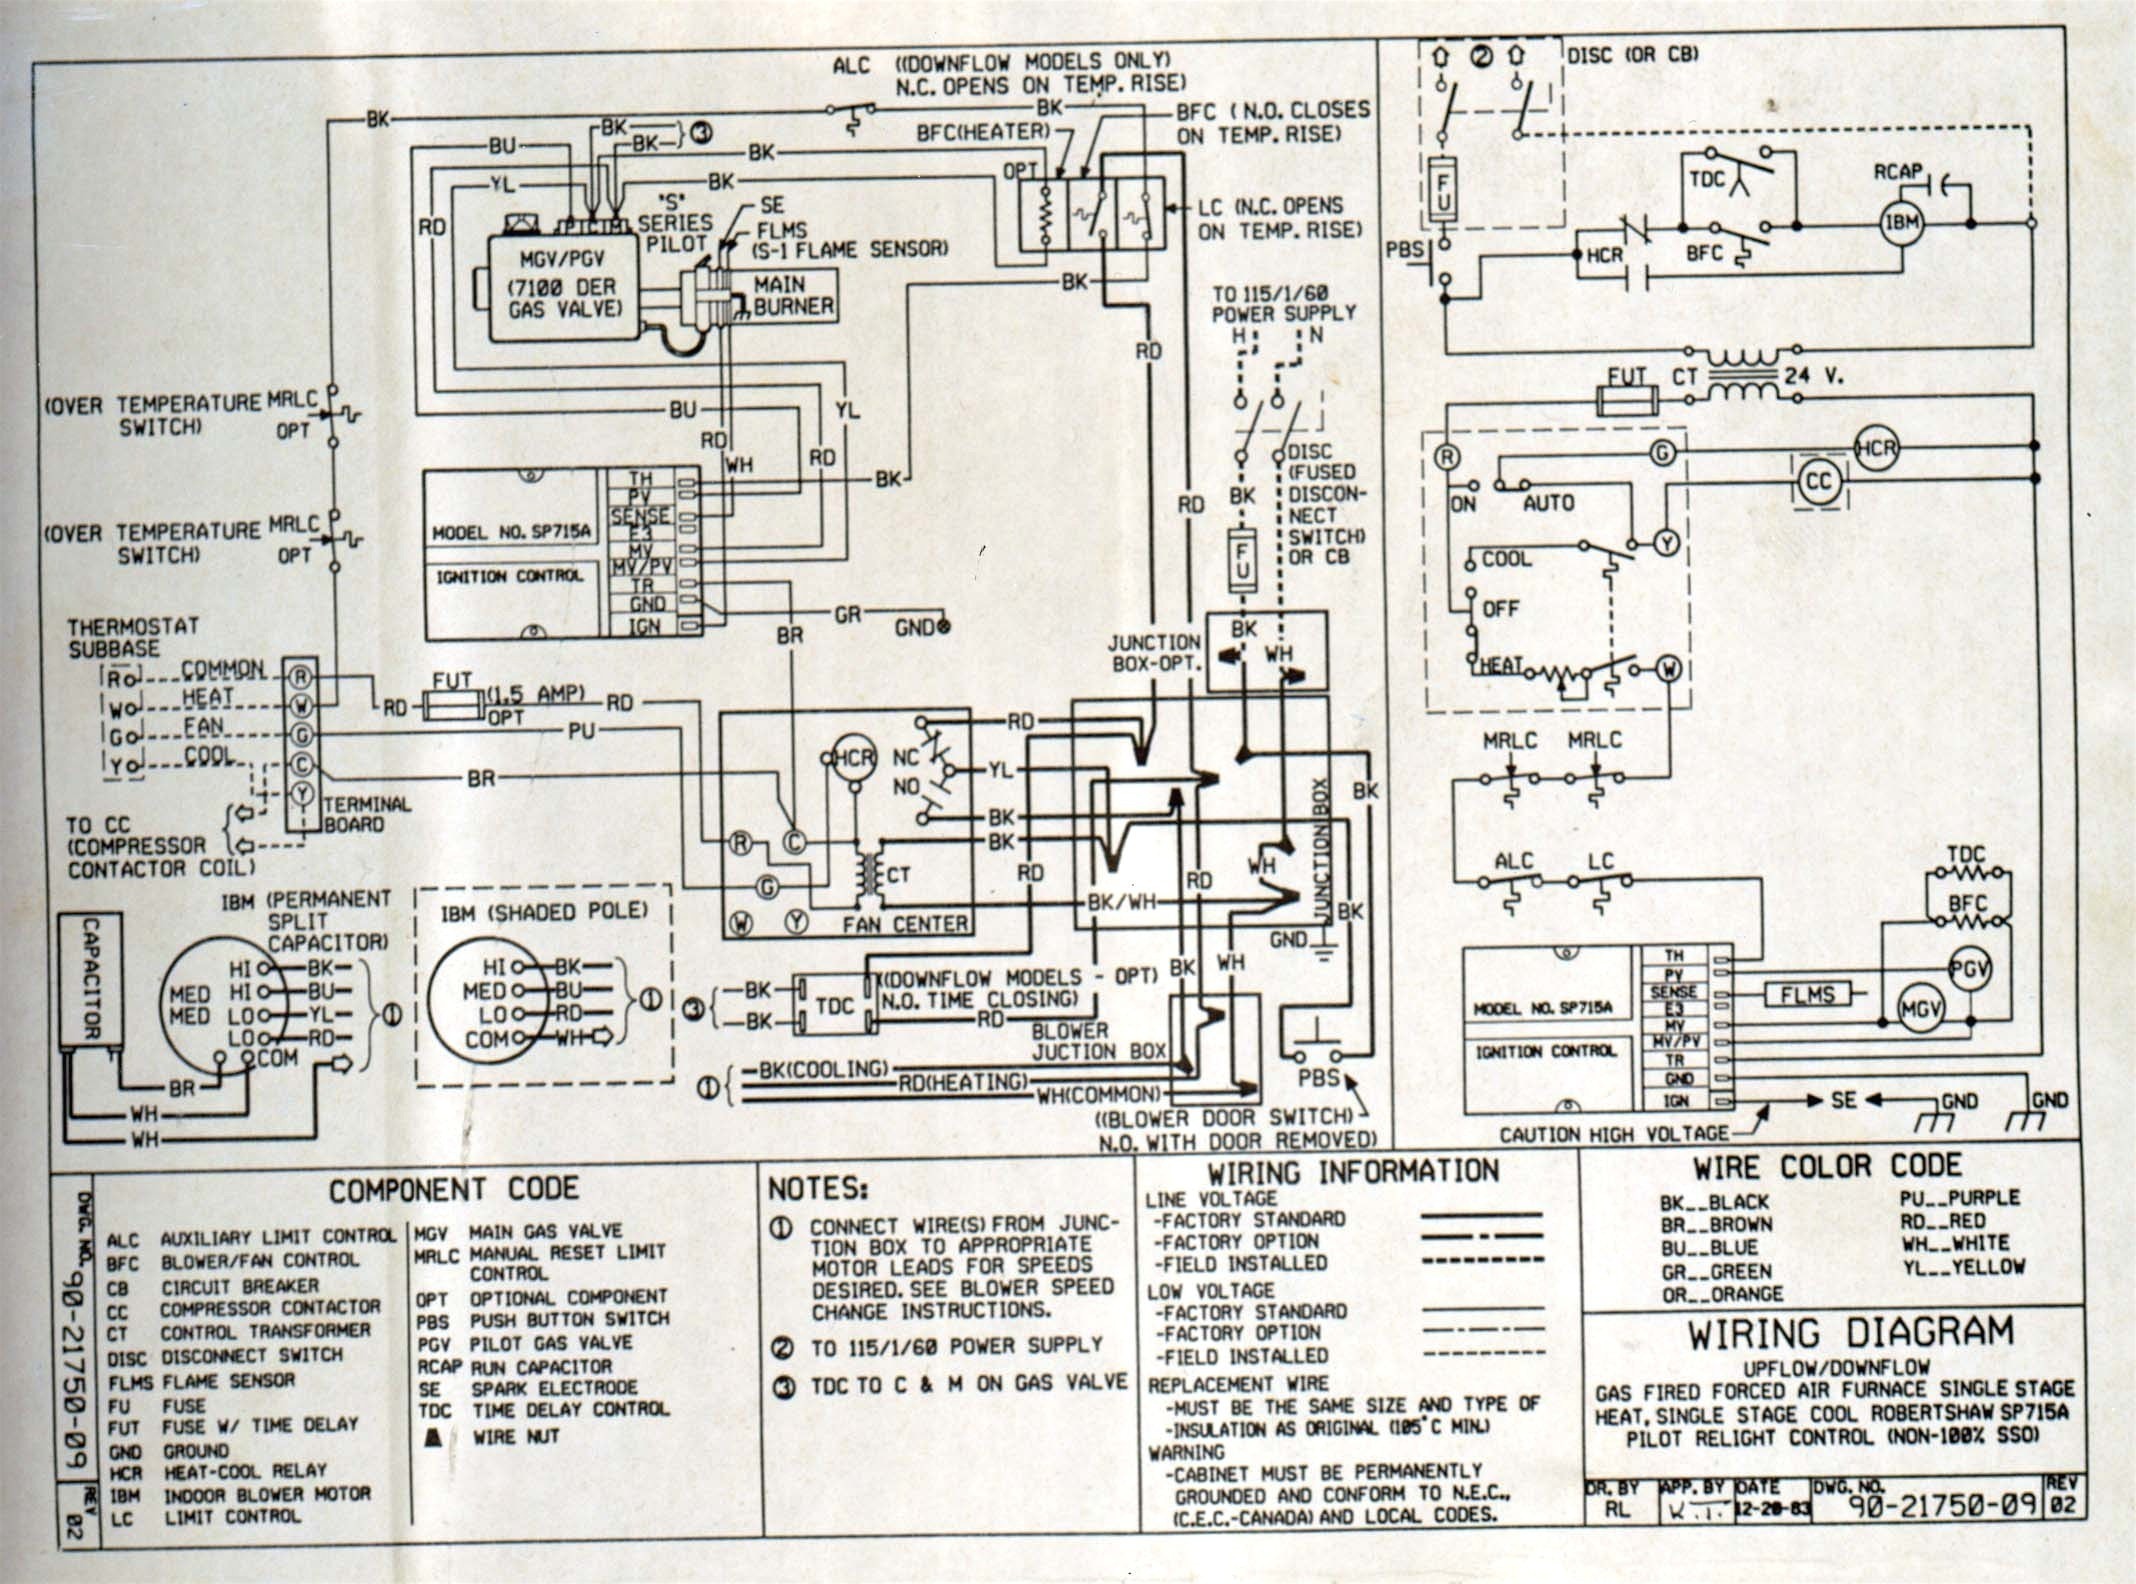 Dometic thermostat Wiring Diagram Wiring Diagram for Ge Dryer Motor Save Wiring Diagram for Ge Of Dometic thermostat Wiring Diagram